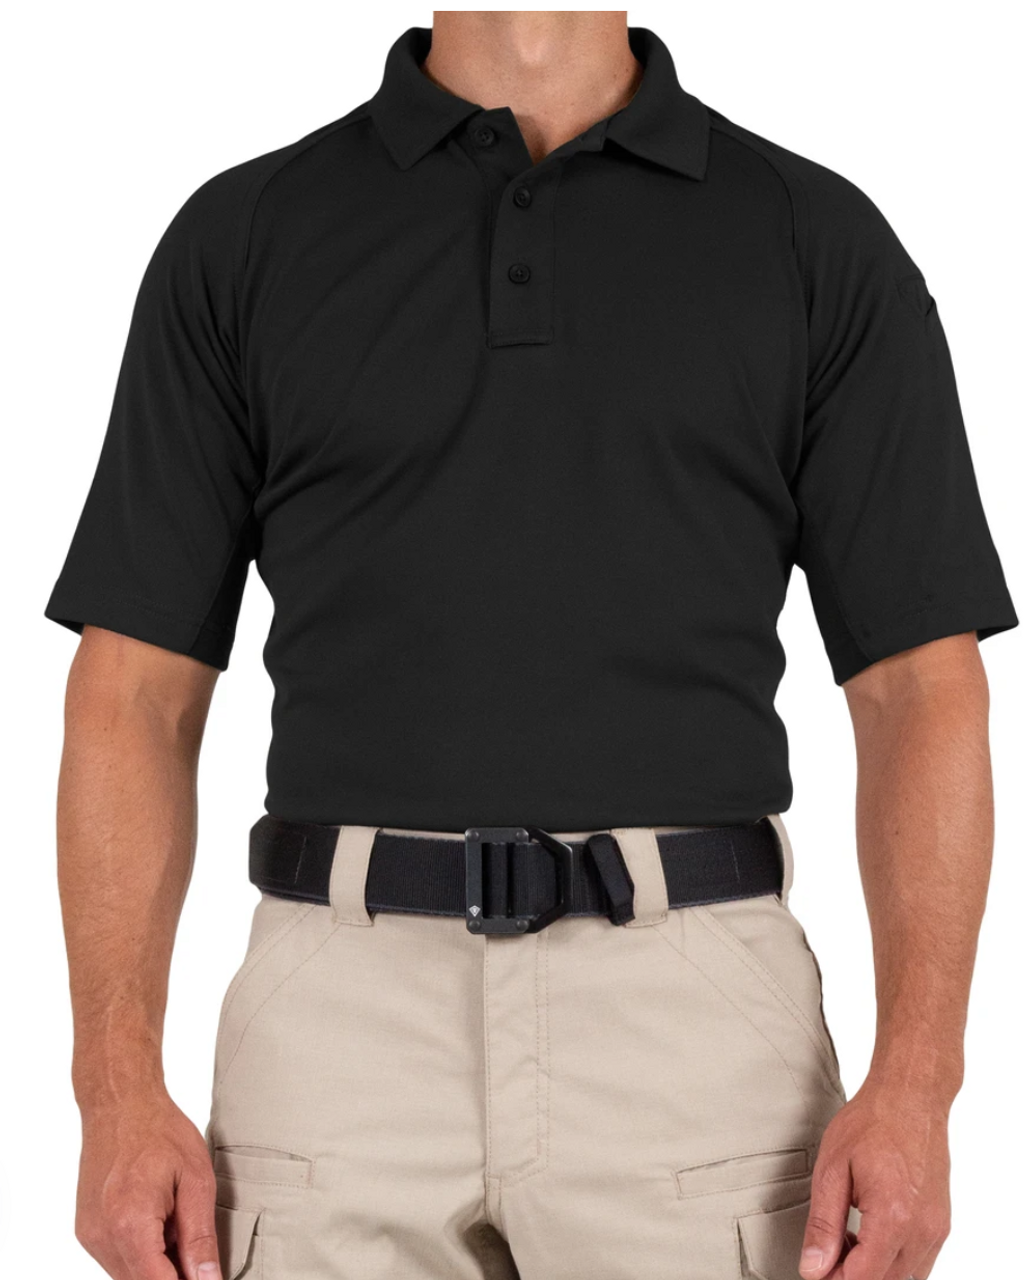 This versatile tactical polo, with superior fabric, fit, and features is the go-to shirt for active professionals. First Tactical’s Performance Short Sleeve Polo works as hard as you do, while maintaining a great look that will hold up under all conditions.